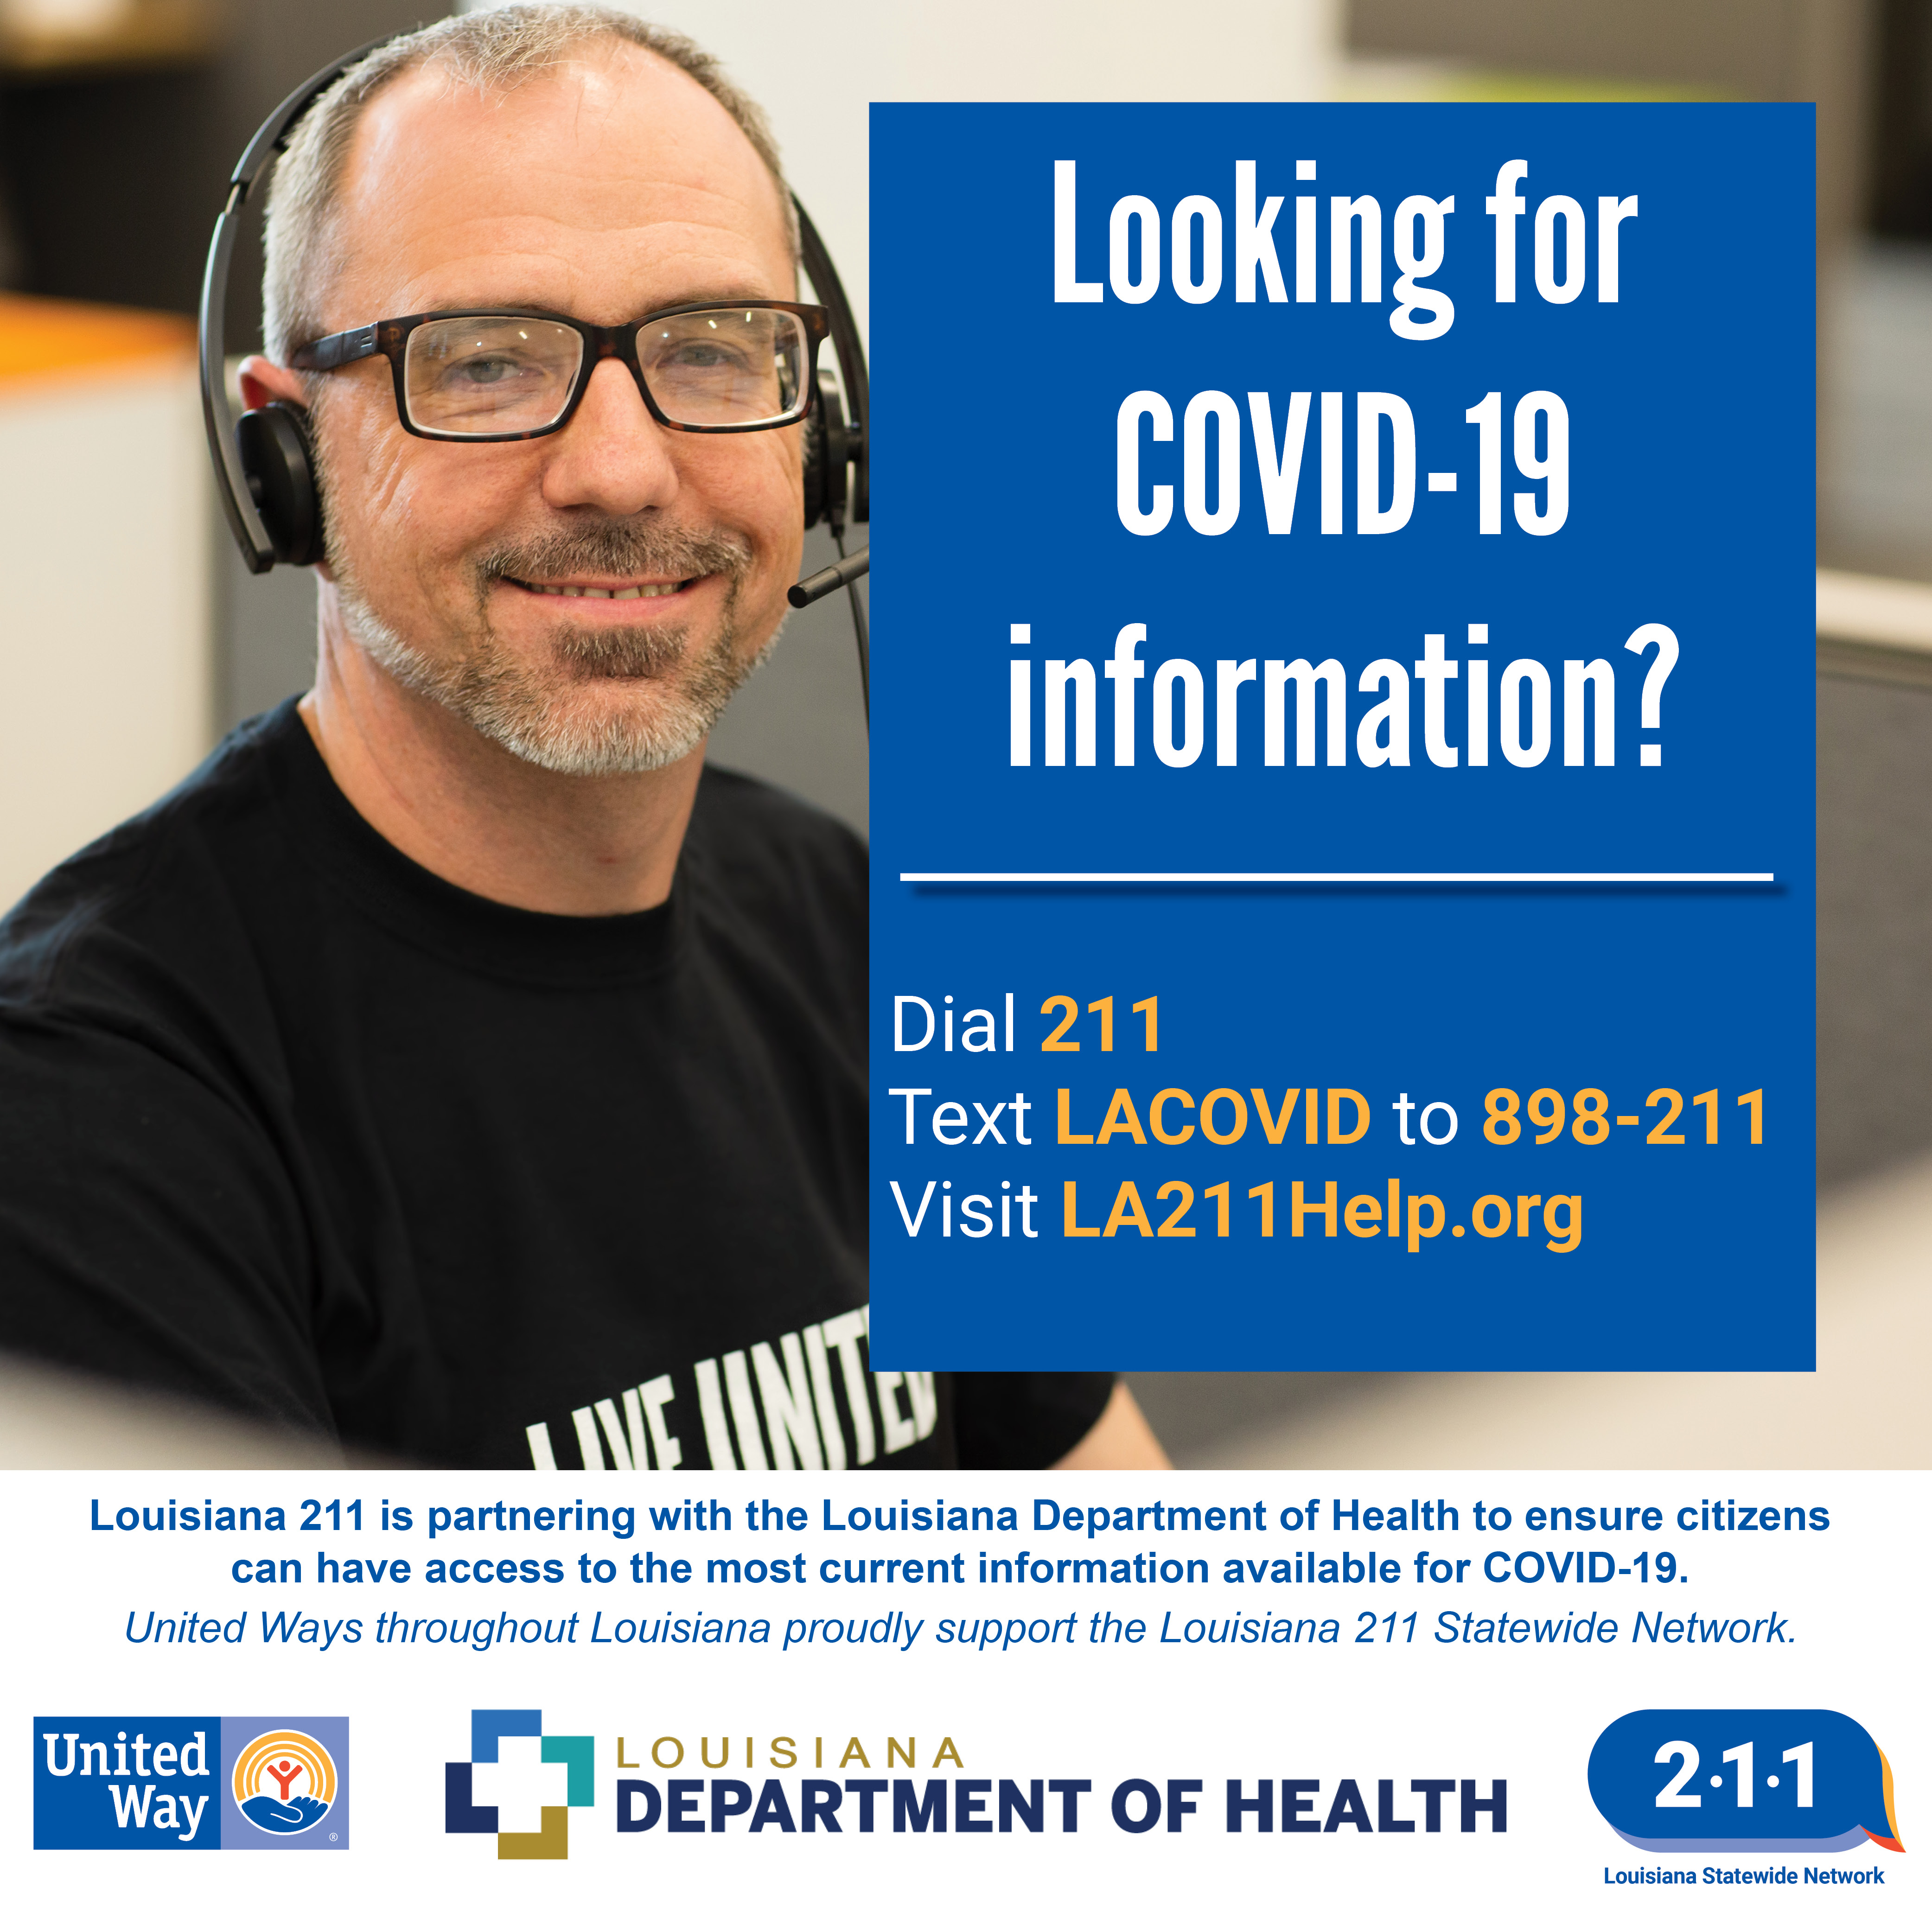 Looking for COVID-19 Information? Connect to 211